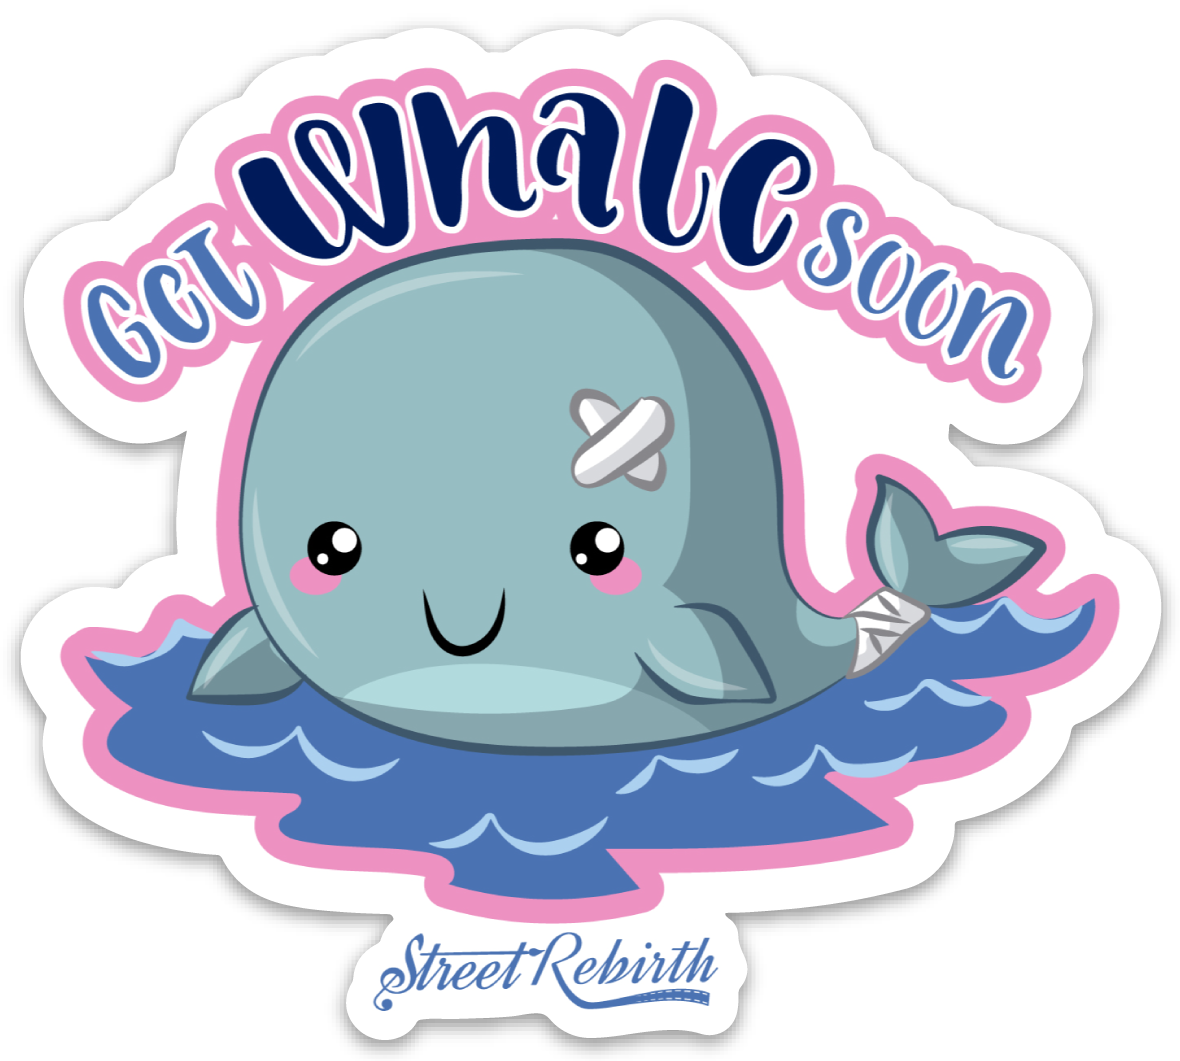 GET WHALE SOON PUN STICKER – ONE 4 INCH WATER PROOF VINYL STICKER – FOR HYDRO FLASK, SKATEBOARD, LAPTOP, PLANNER, CAR, COLLECTING, GIFTING